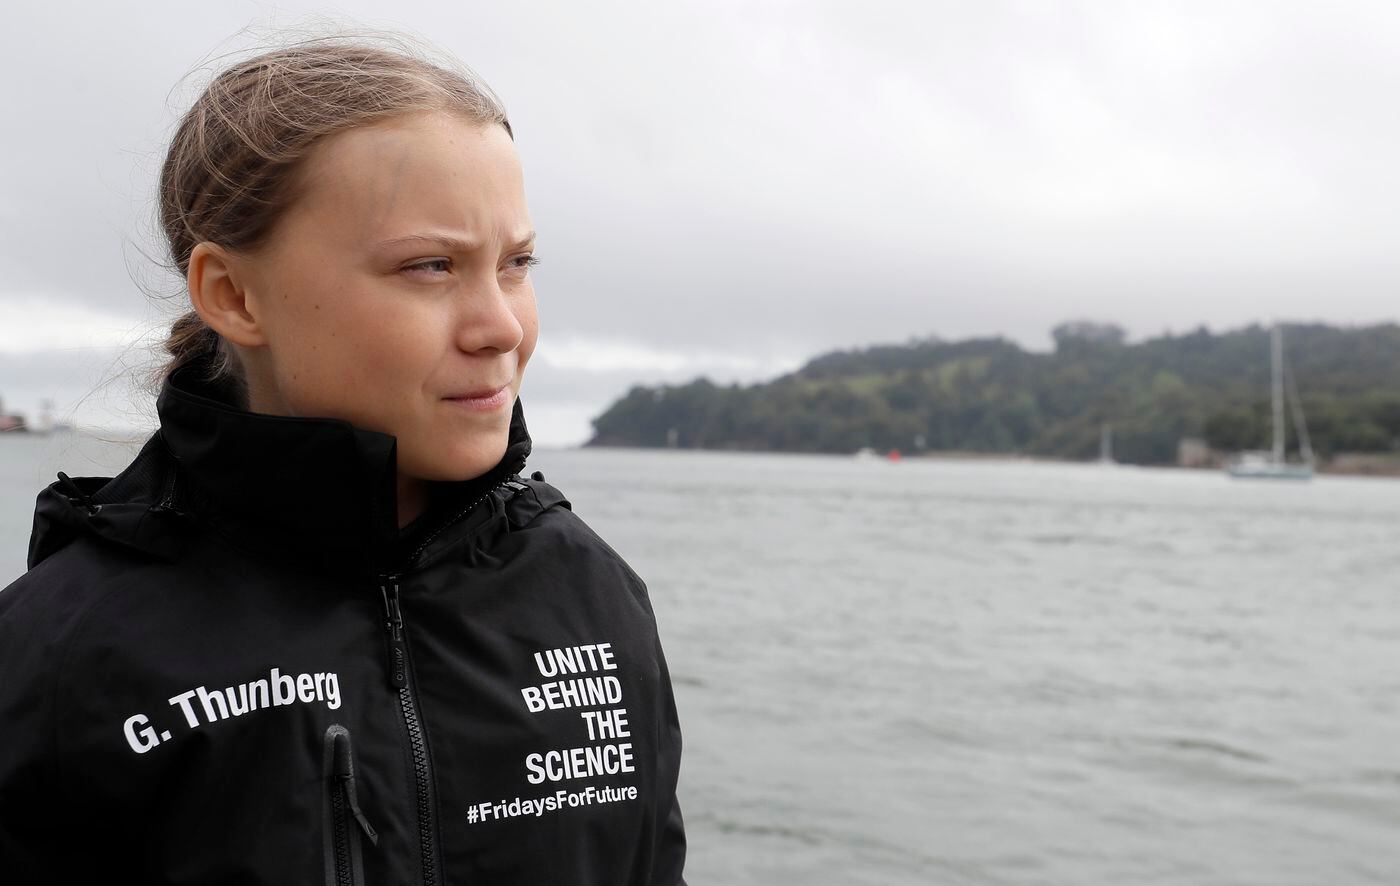 Climate change activist Greta Thunberg arrives to board the Malizia II boat in Plymouth, England earlier this month. The 16-year-old who has inspired student protests around the world will leave Plymouth, England, bound for New York in a high-tech but low-comfort sailboat.